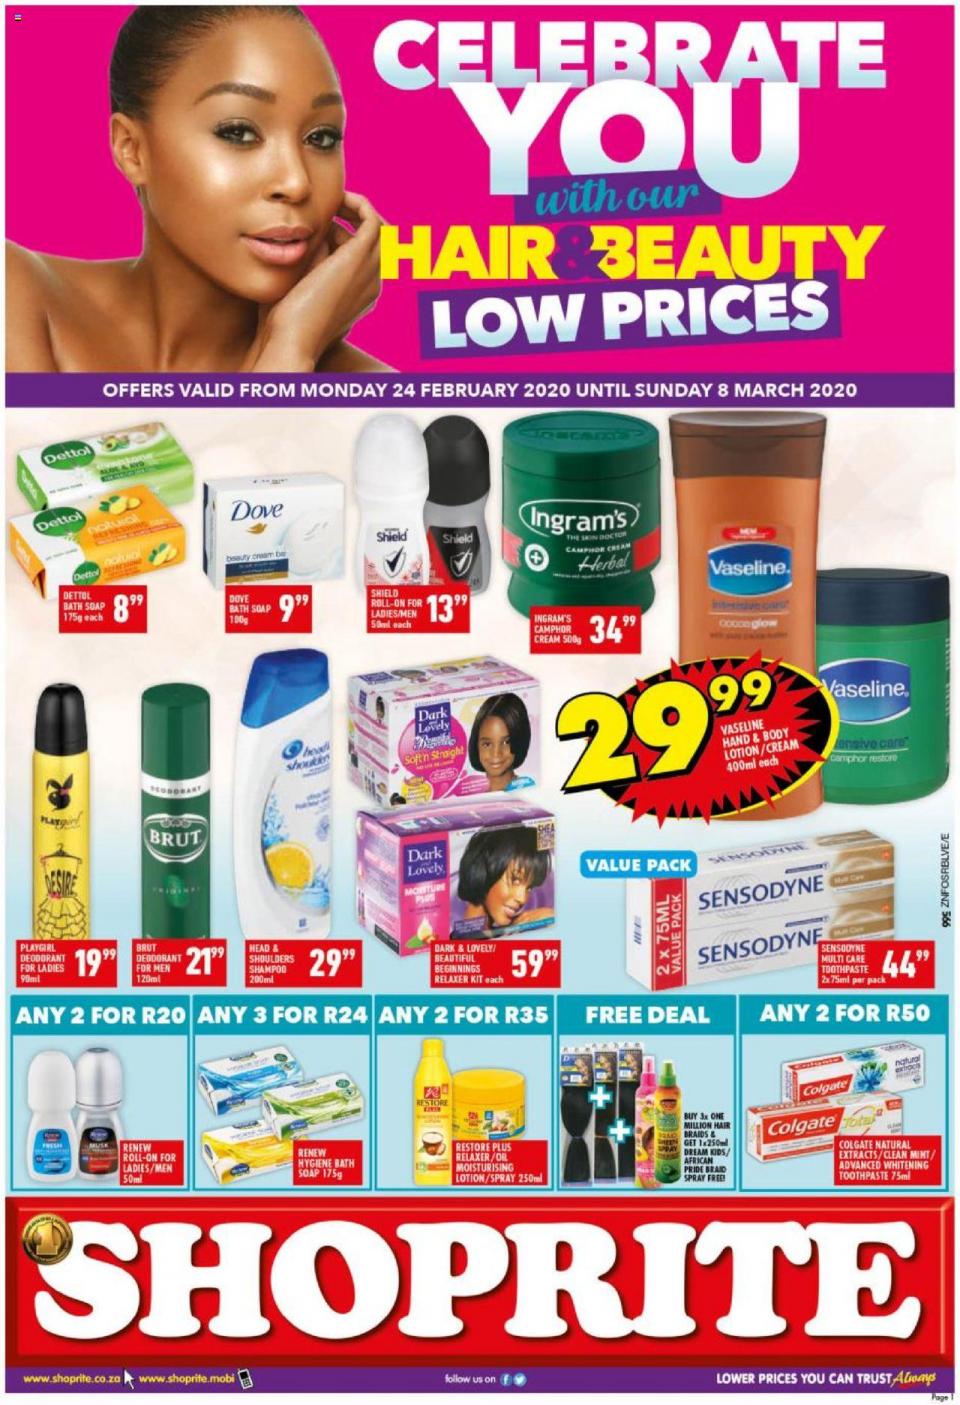 Shoprite Specials Hair & Beauty Promotion 26 February 2020